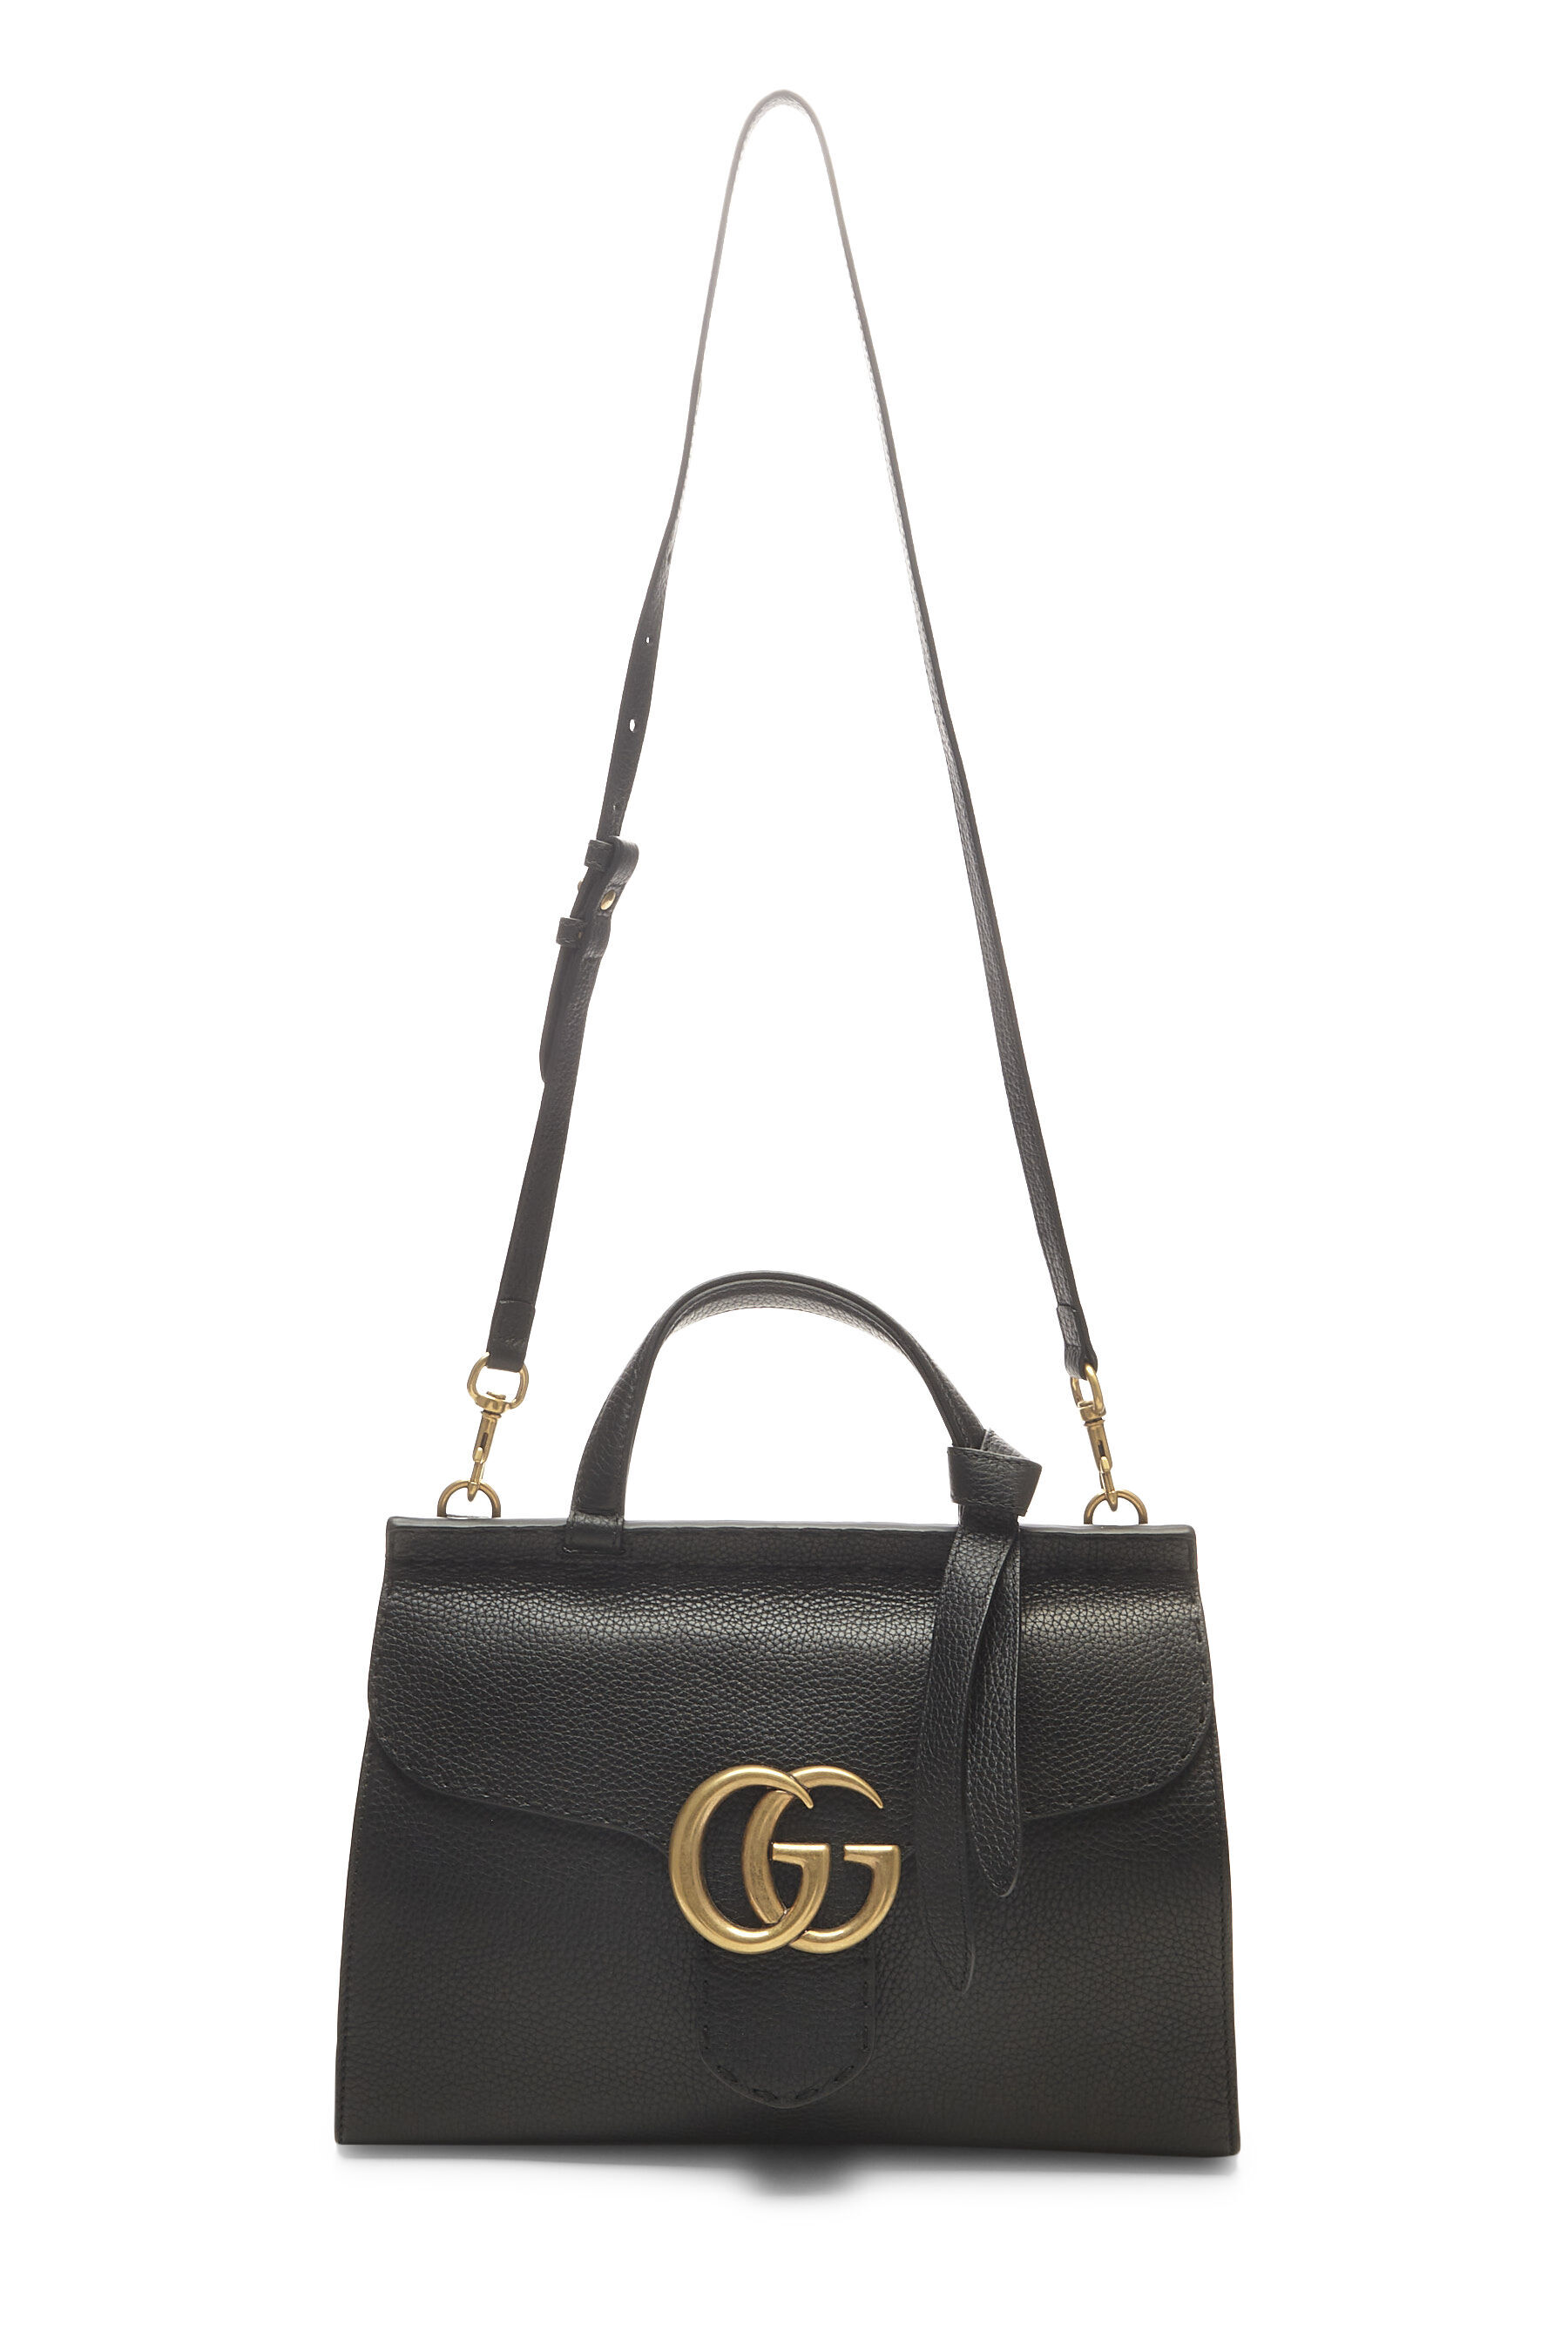 Gucci Gg Small Matelassé Leather Shoulder Bag in Black | Lyst